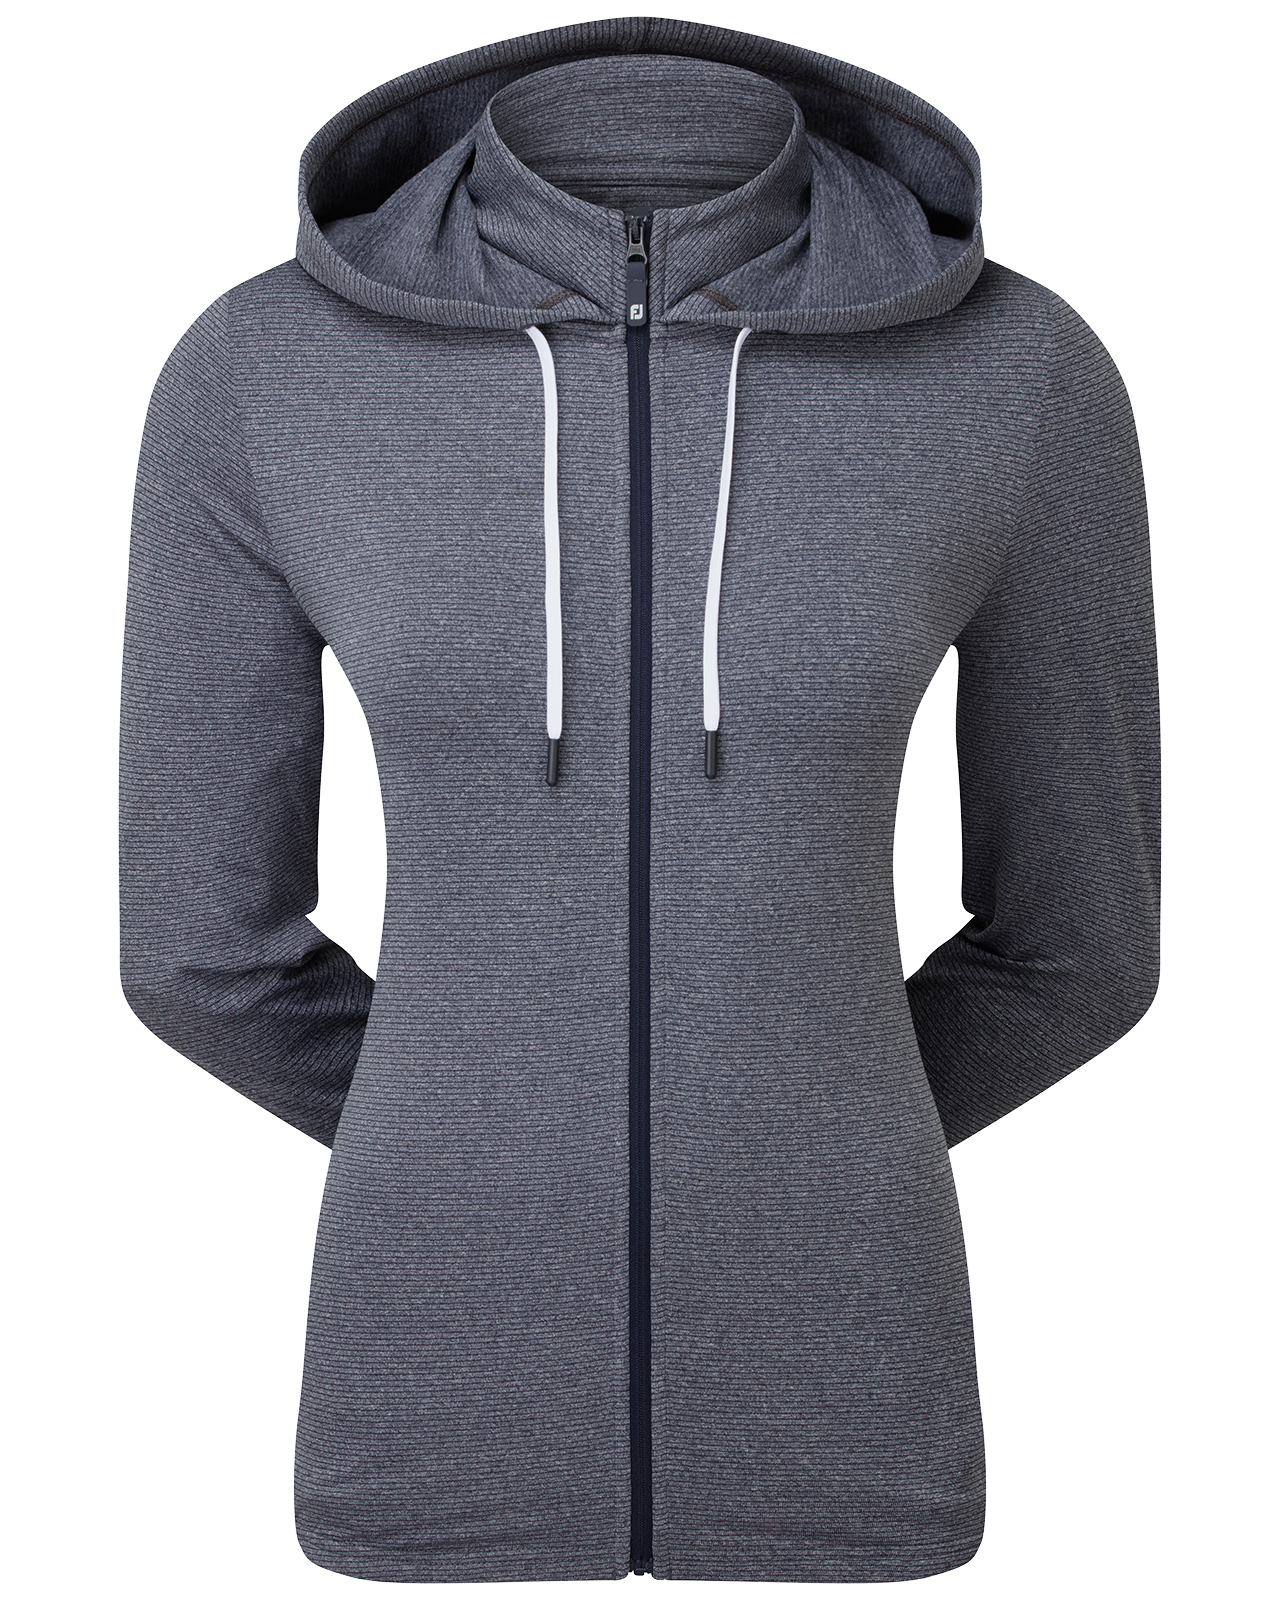 ThermoSeries, Hoodie, Dame - navy